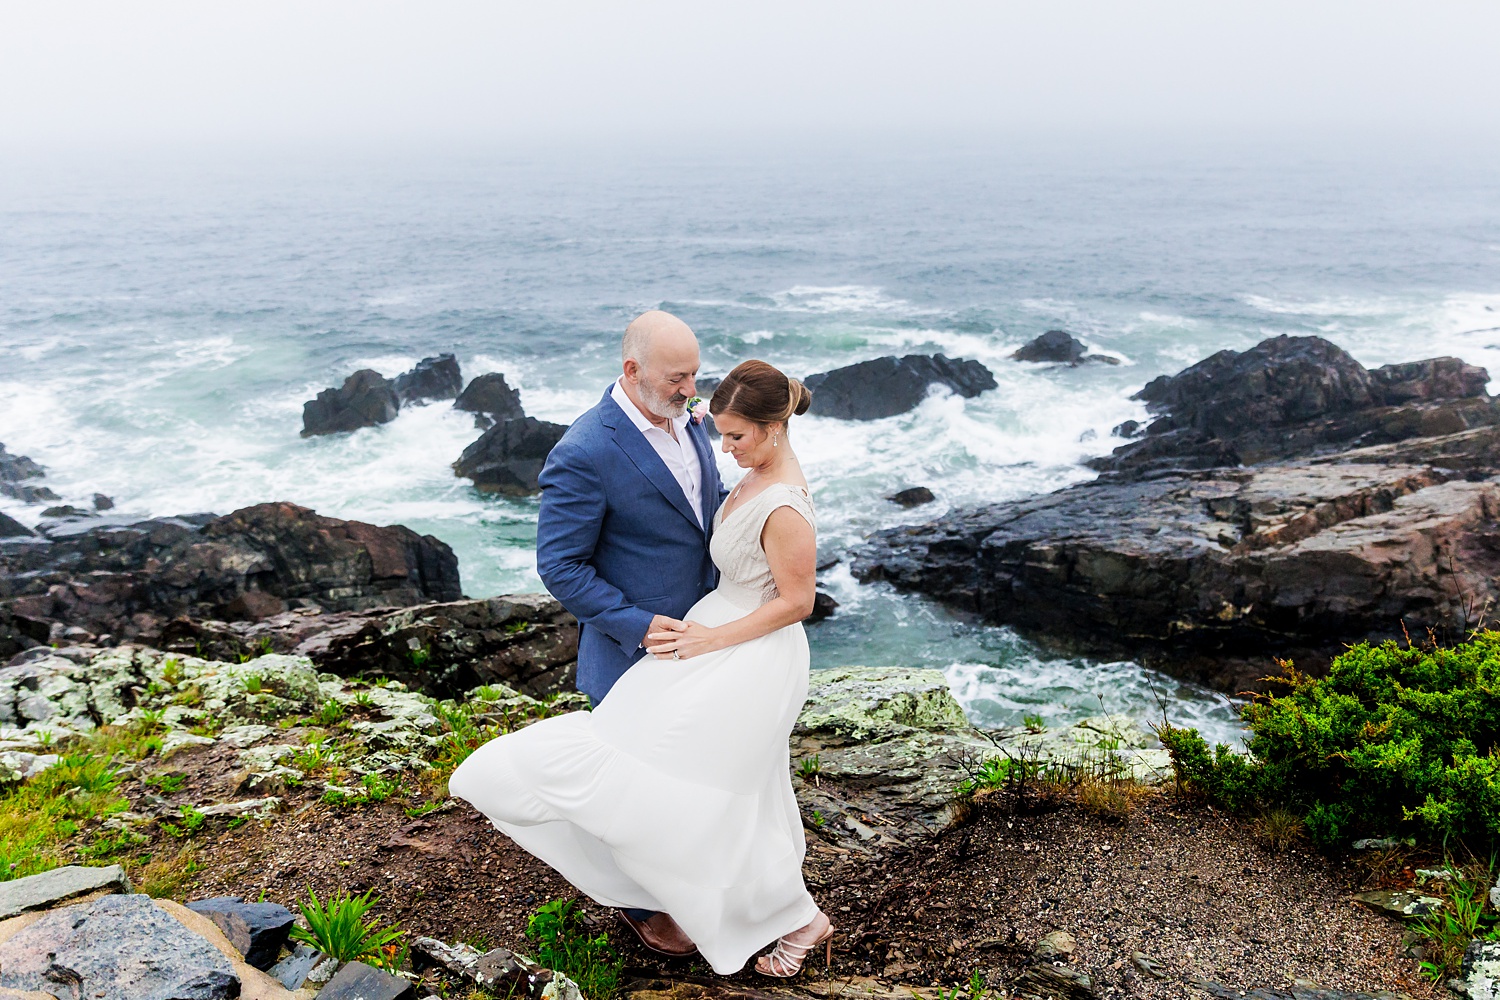 Romantic winds and foggy weather on their rainy sunrise elopement day in Ogunquit Maine